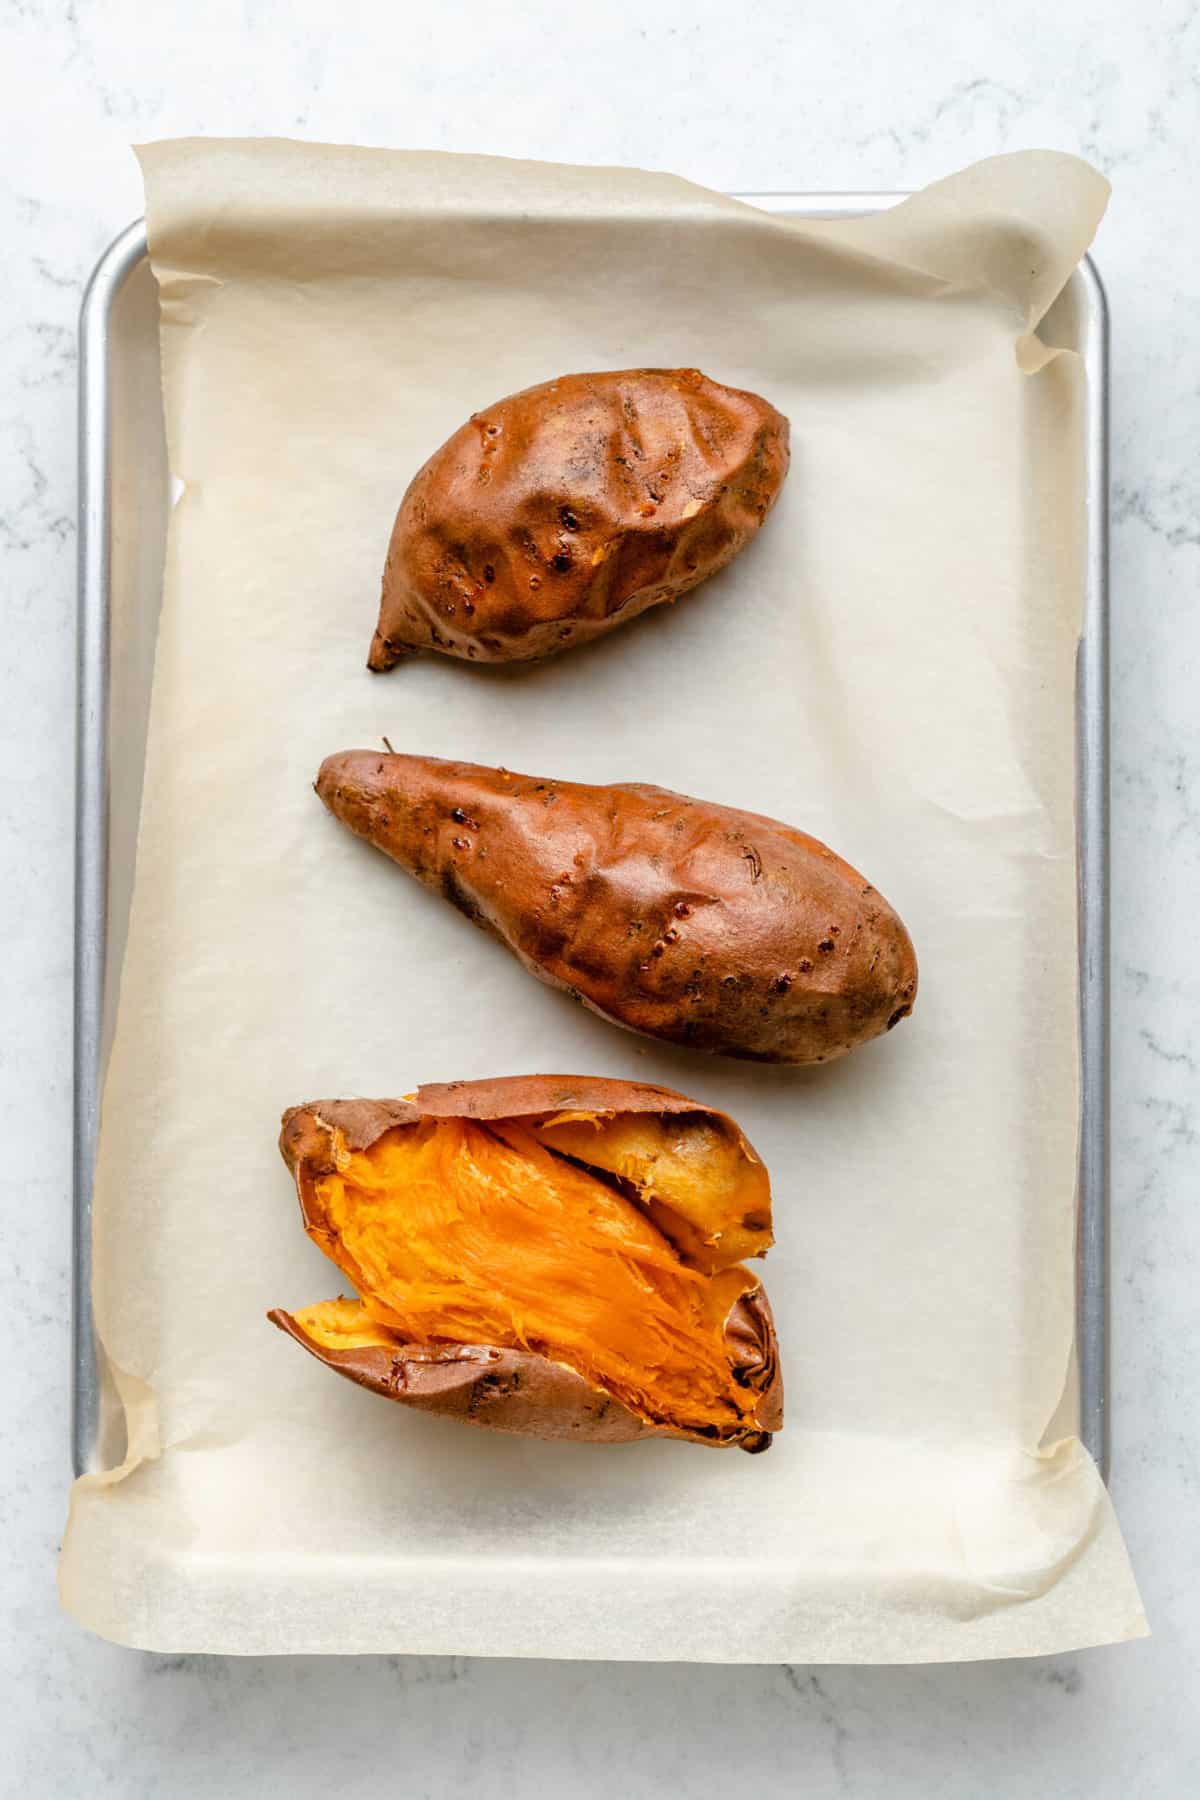 baked sweet potatoes with skin torn open